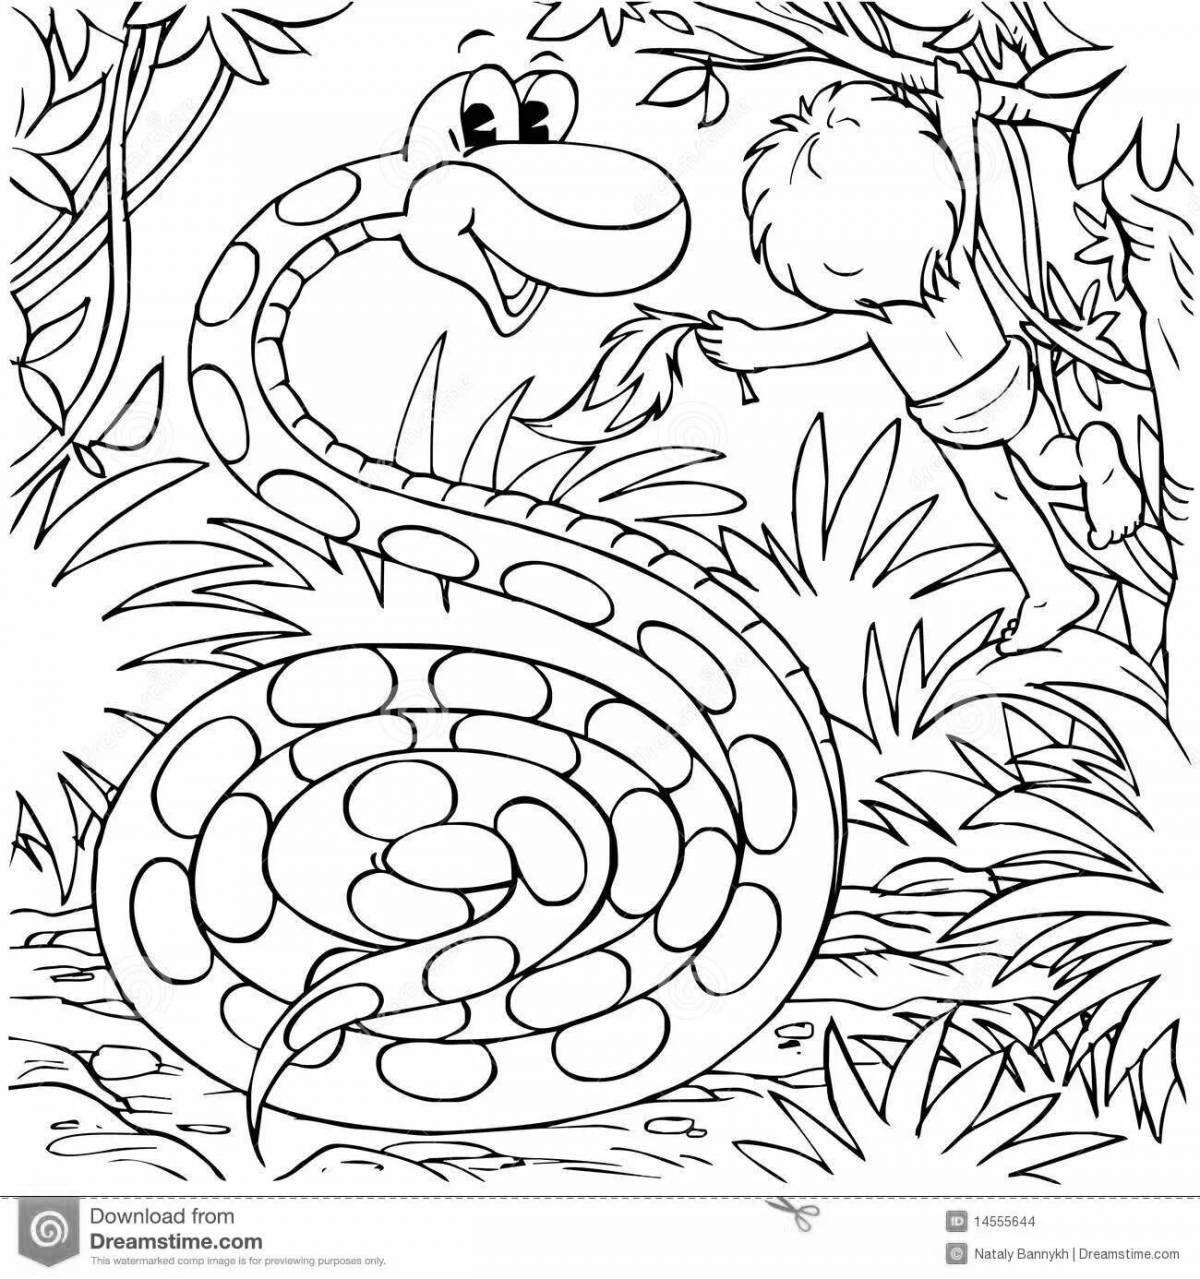 Shiny blue snake coloring page